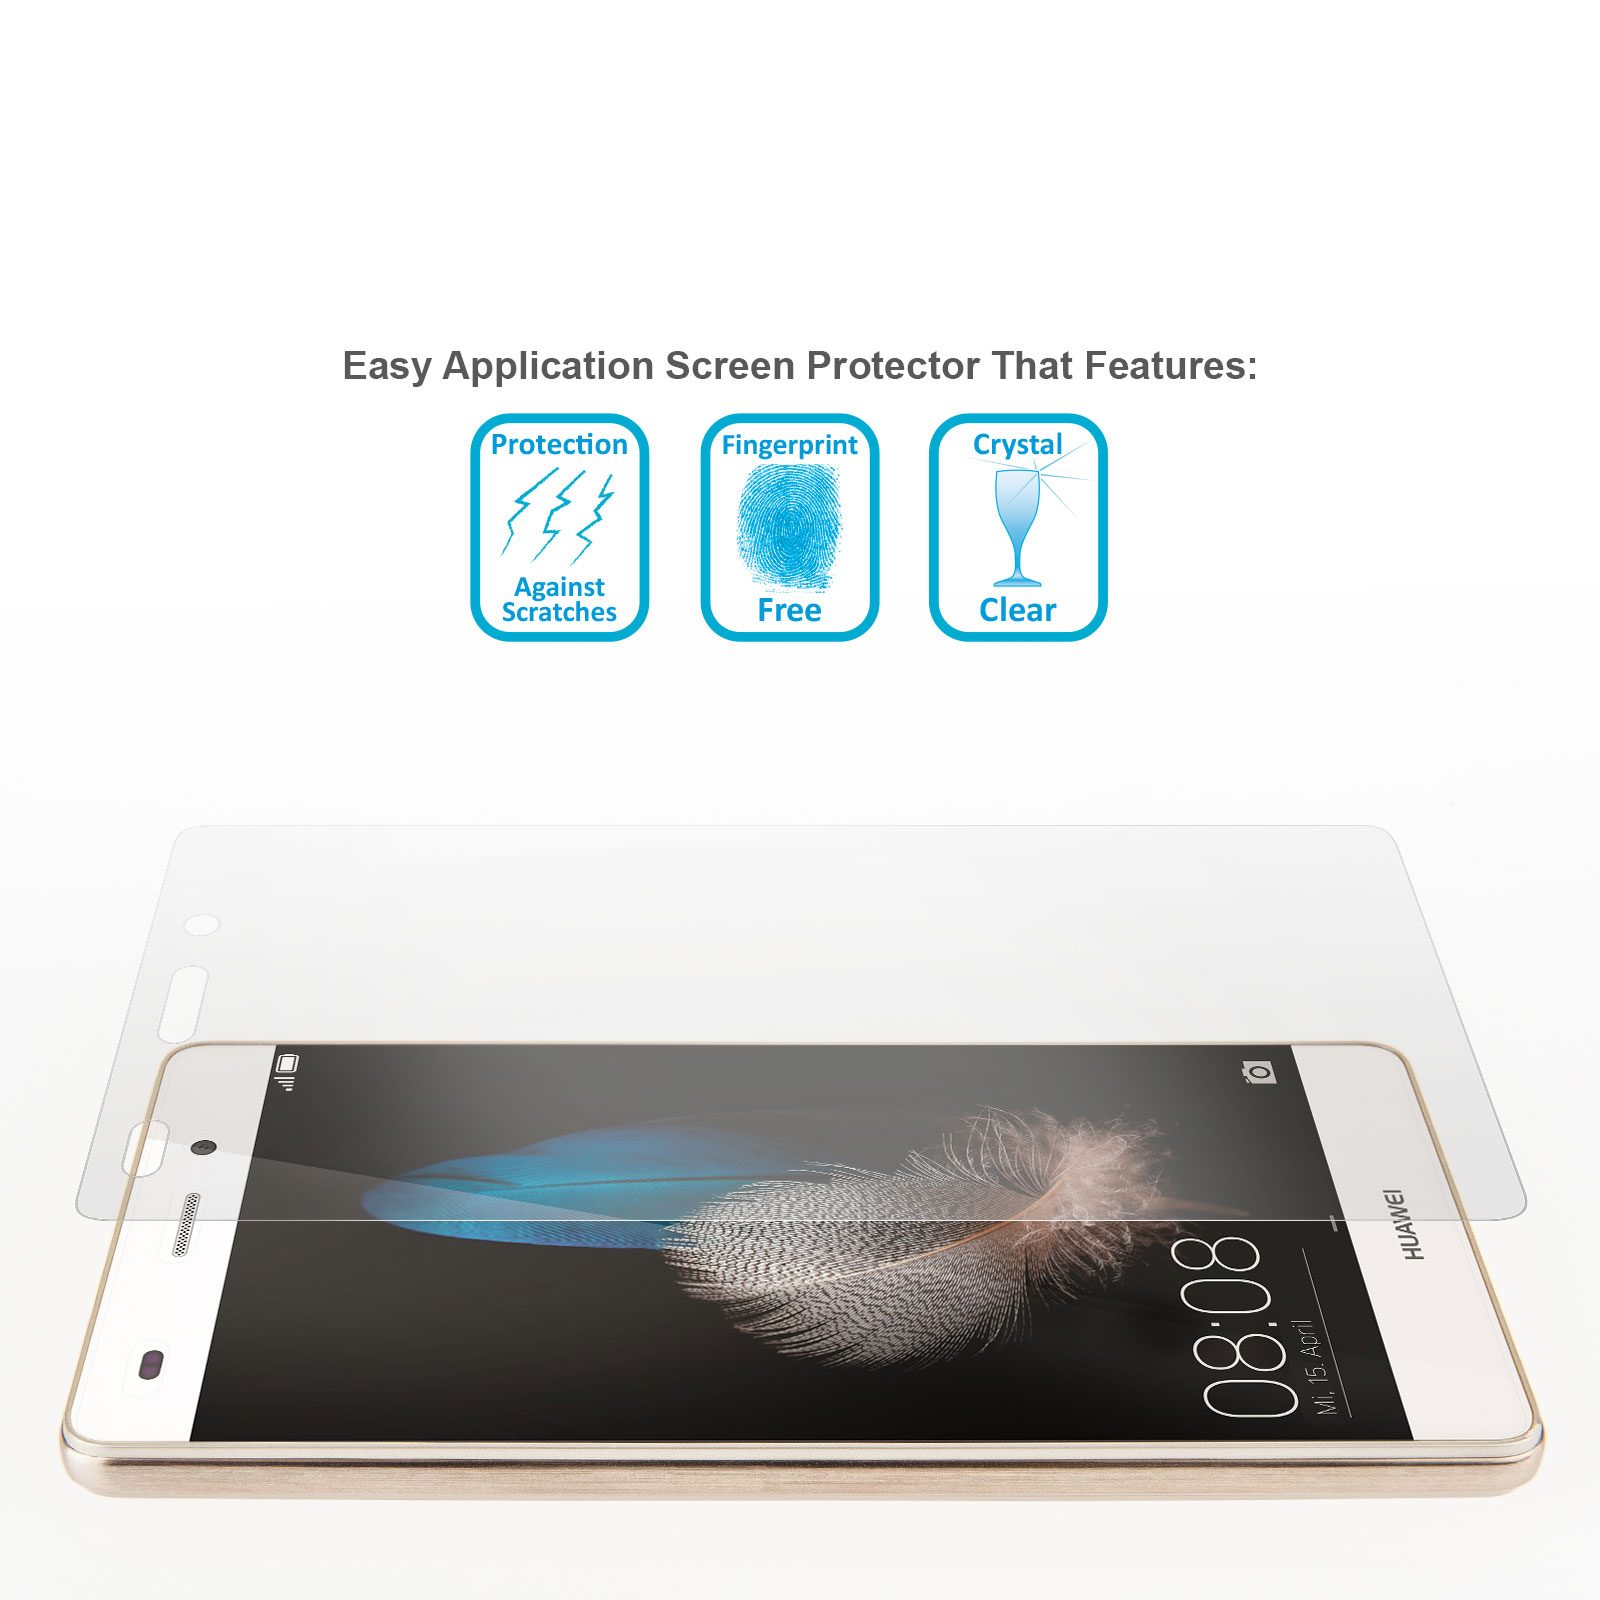 Yousave Accessories Huawei P8 Lite Screen Protectors x5